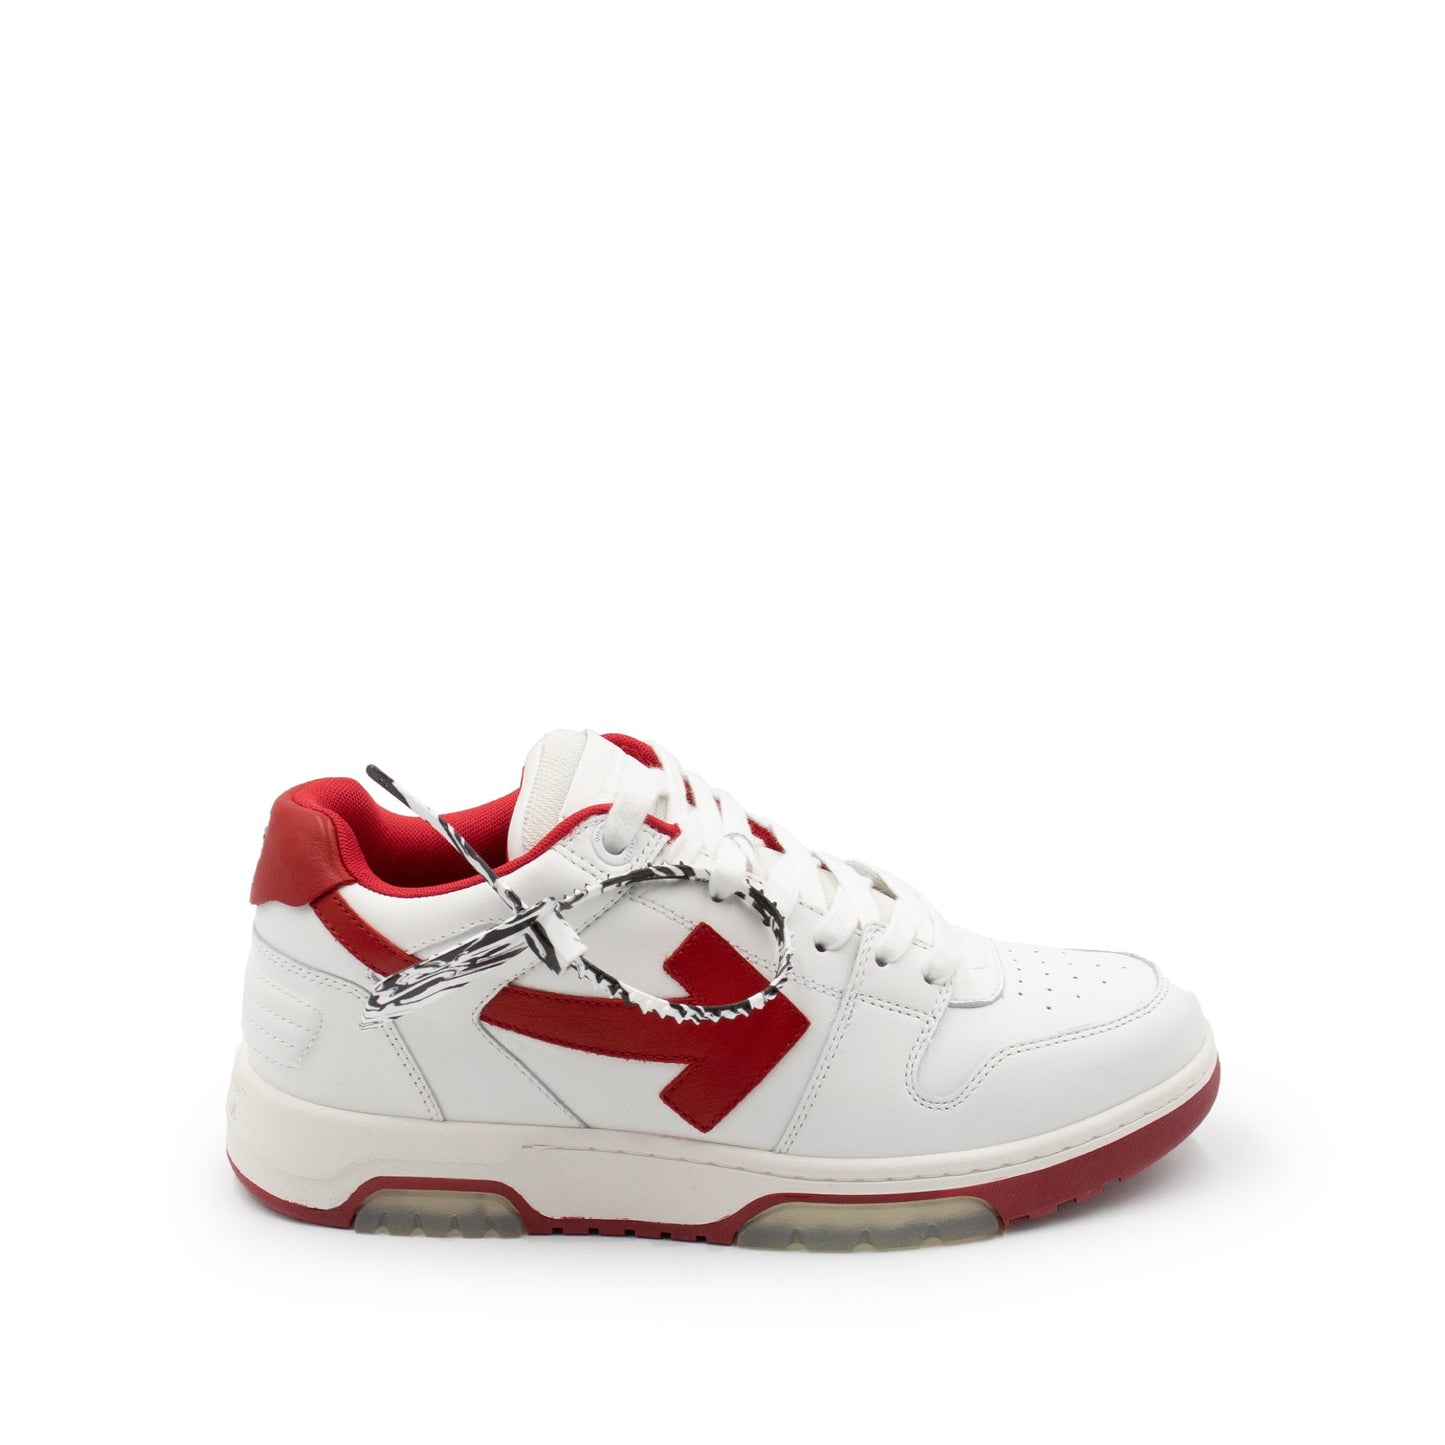 Out Of Office Low Sneaker in White/Red